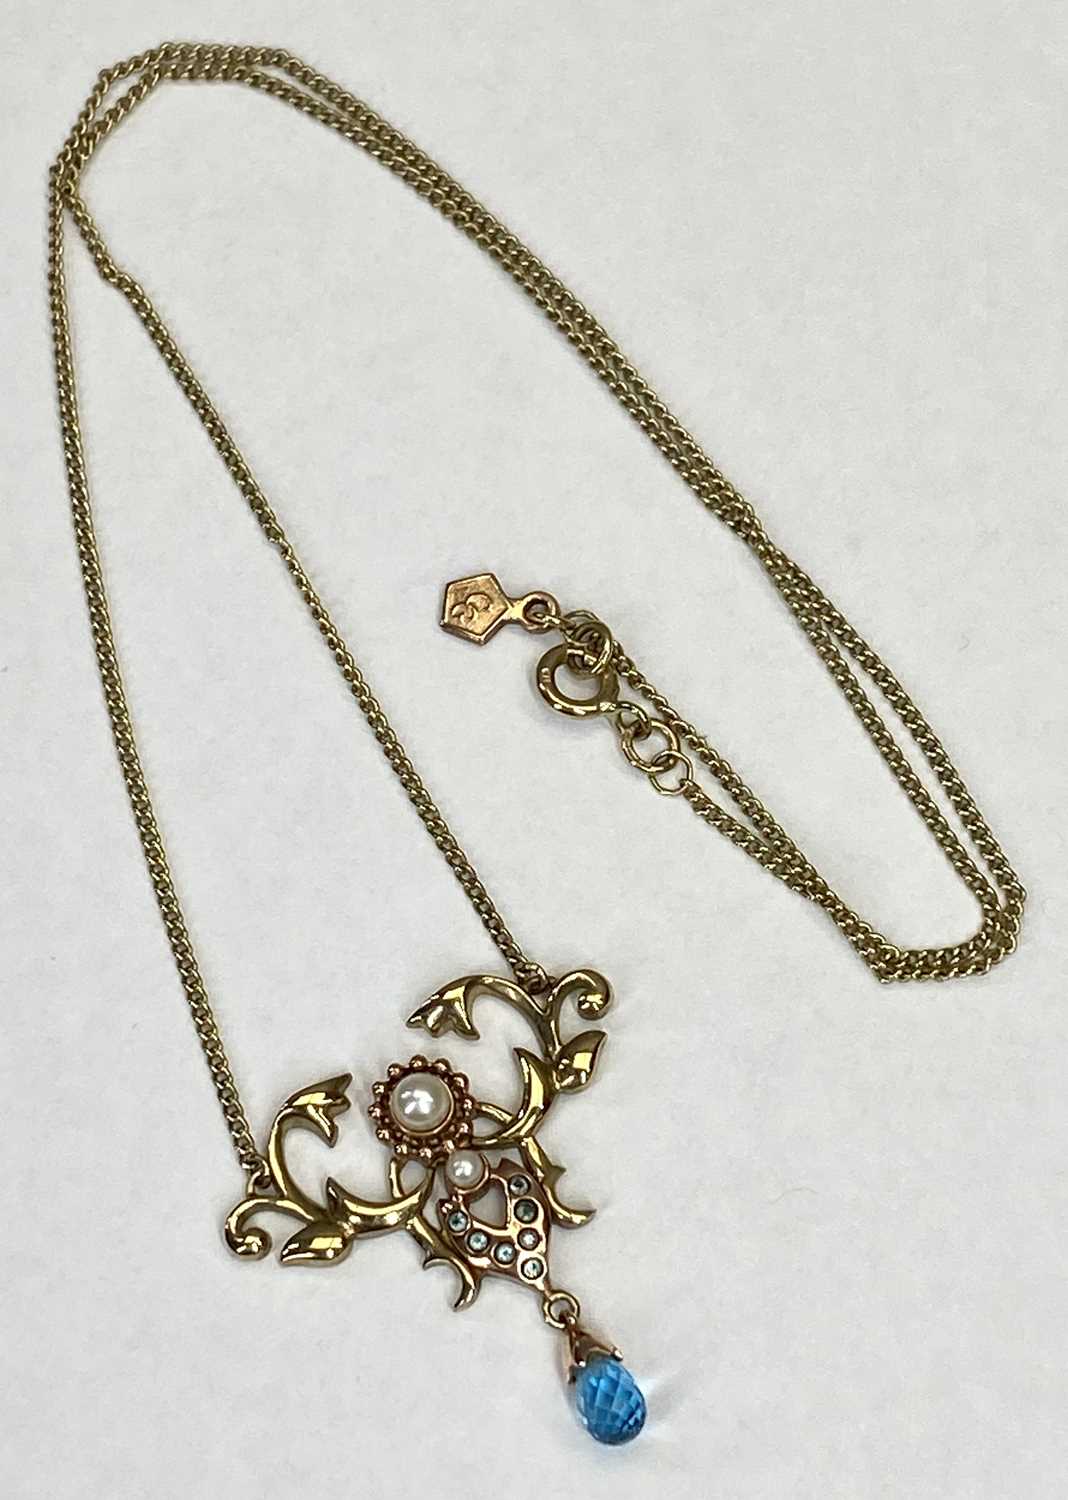 CLOGAU 9CT GOLD VICTORIAN STYLE SEED PEARL PENDANT NECKLACE - 24.5cms overall L, 32 x 30mm the - Image 3 of 5